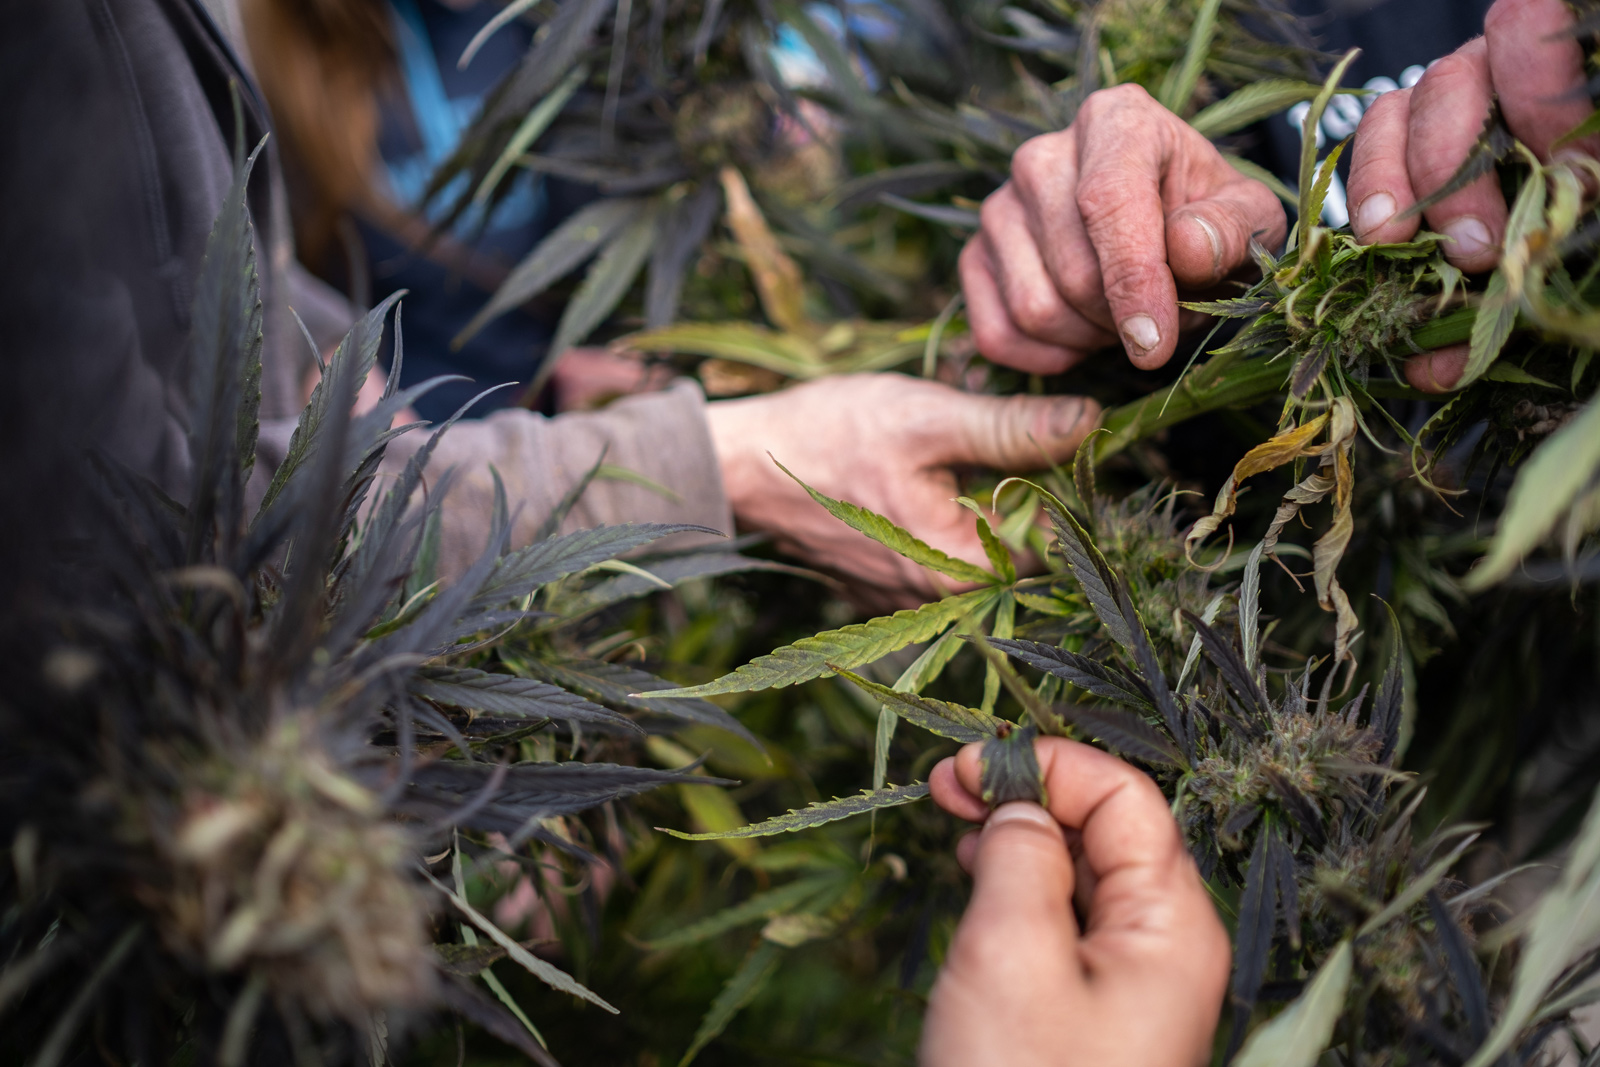 Photo of hands picking marijuana leaves, taken by Emily Kenny for the in-depth reporting project High Stakes 